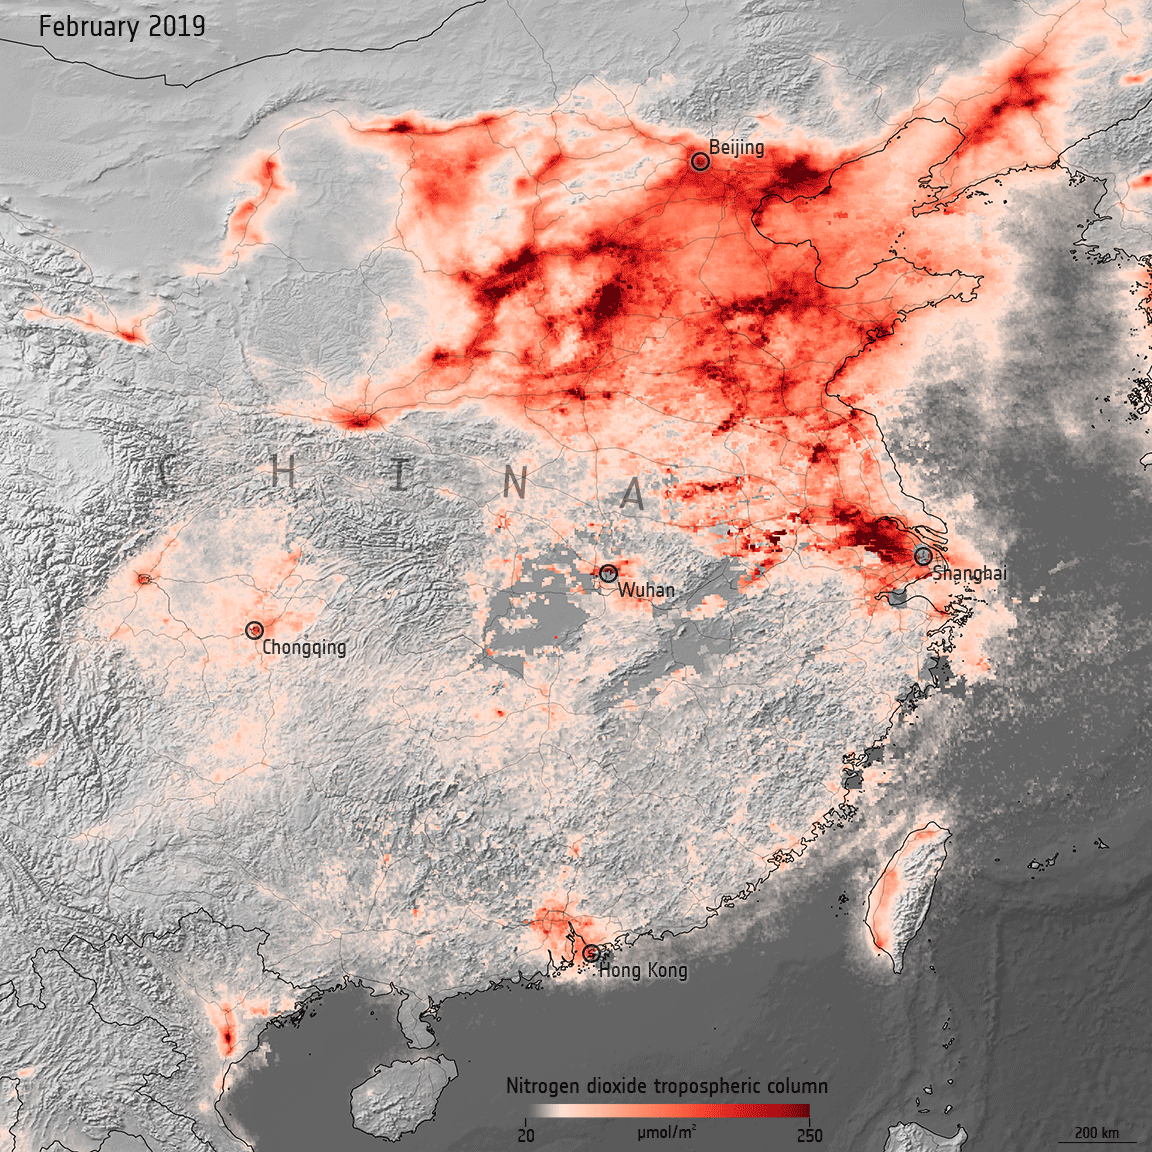 Nitrogen dioxide concentrations over China